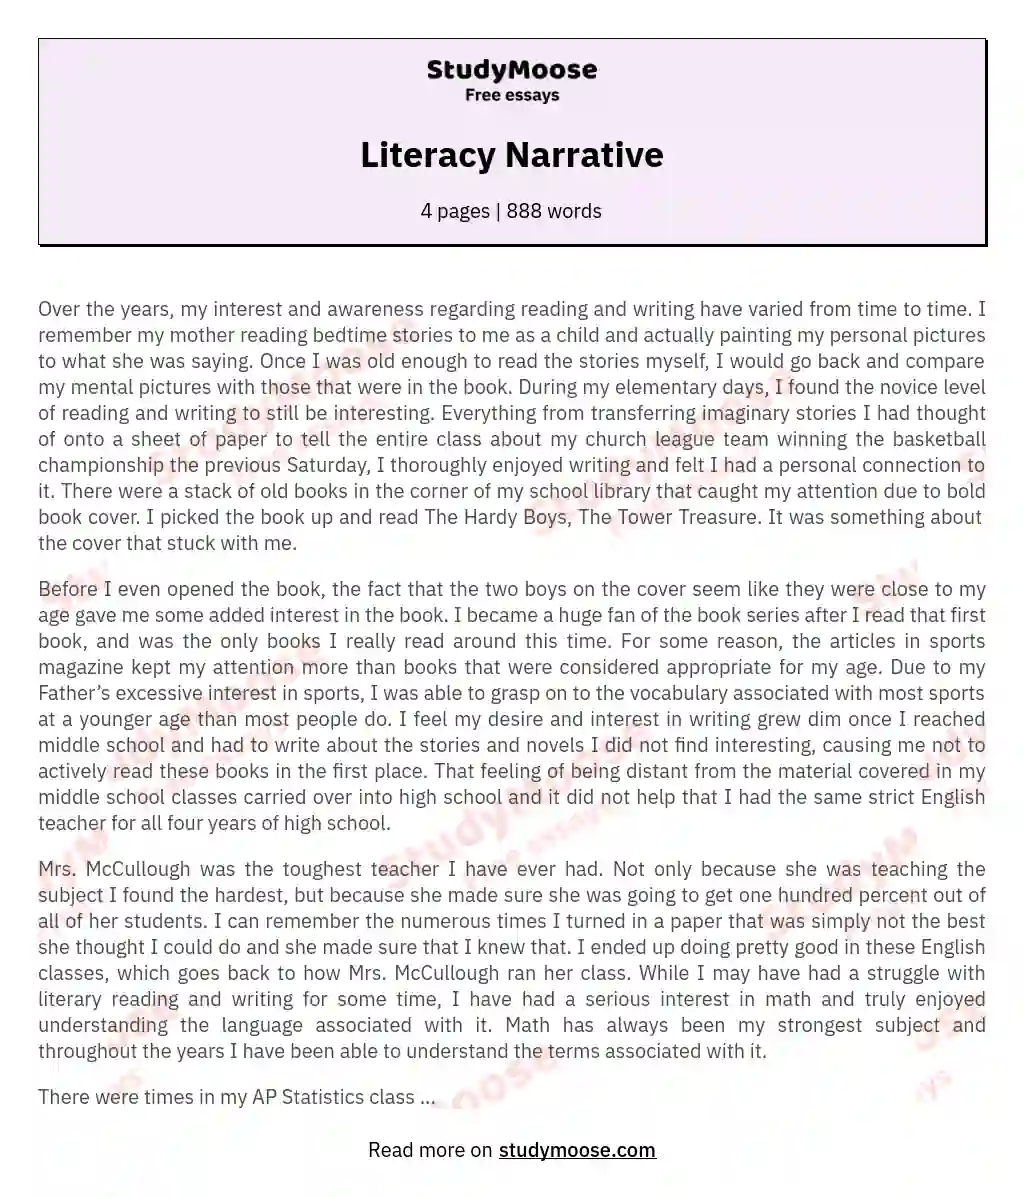 Journey in Words: Literacy from Childhood to College essay